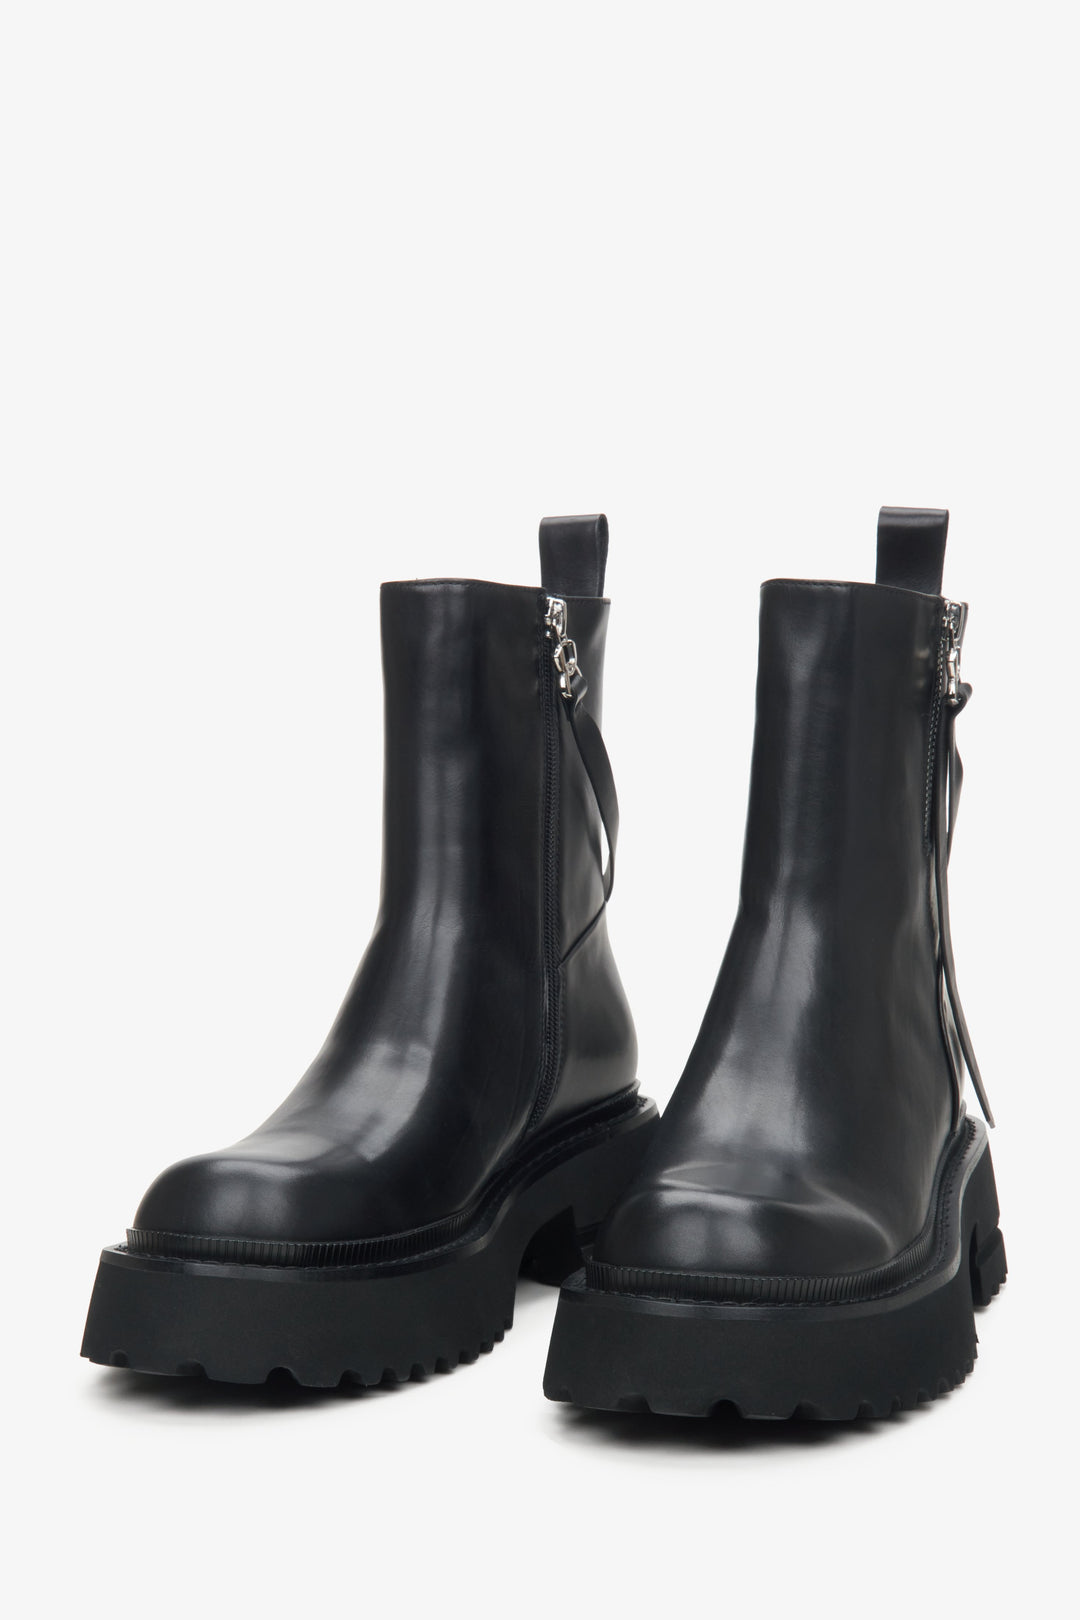 Women's boots made of genuine leather in black by Estro - presentation of the toe.